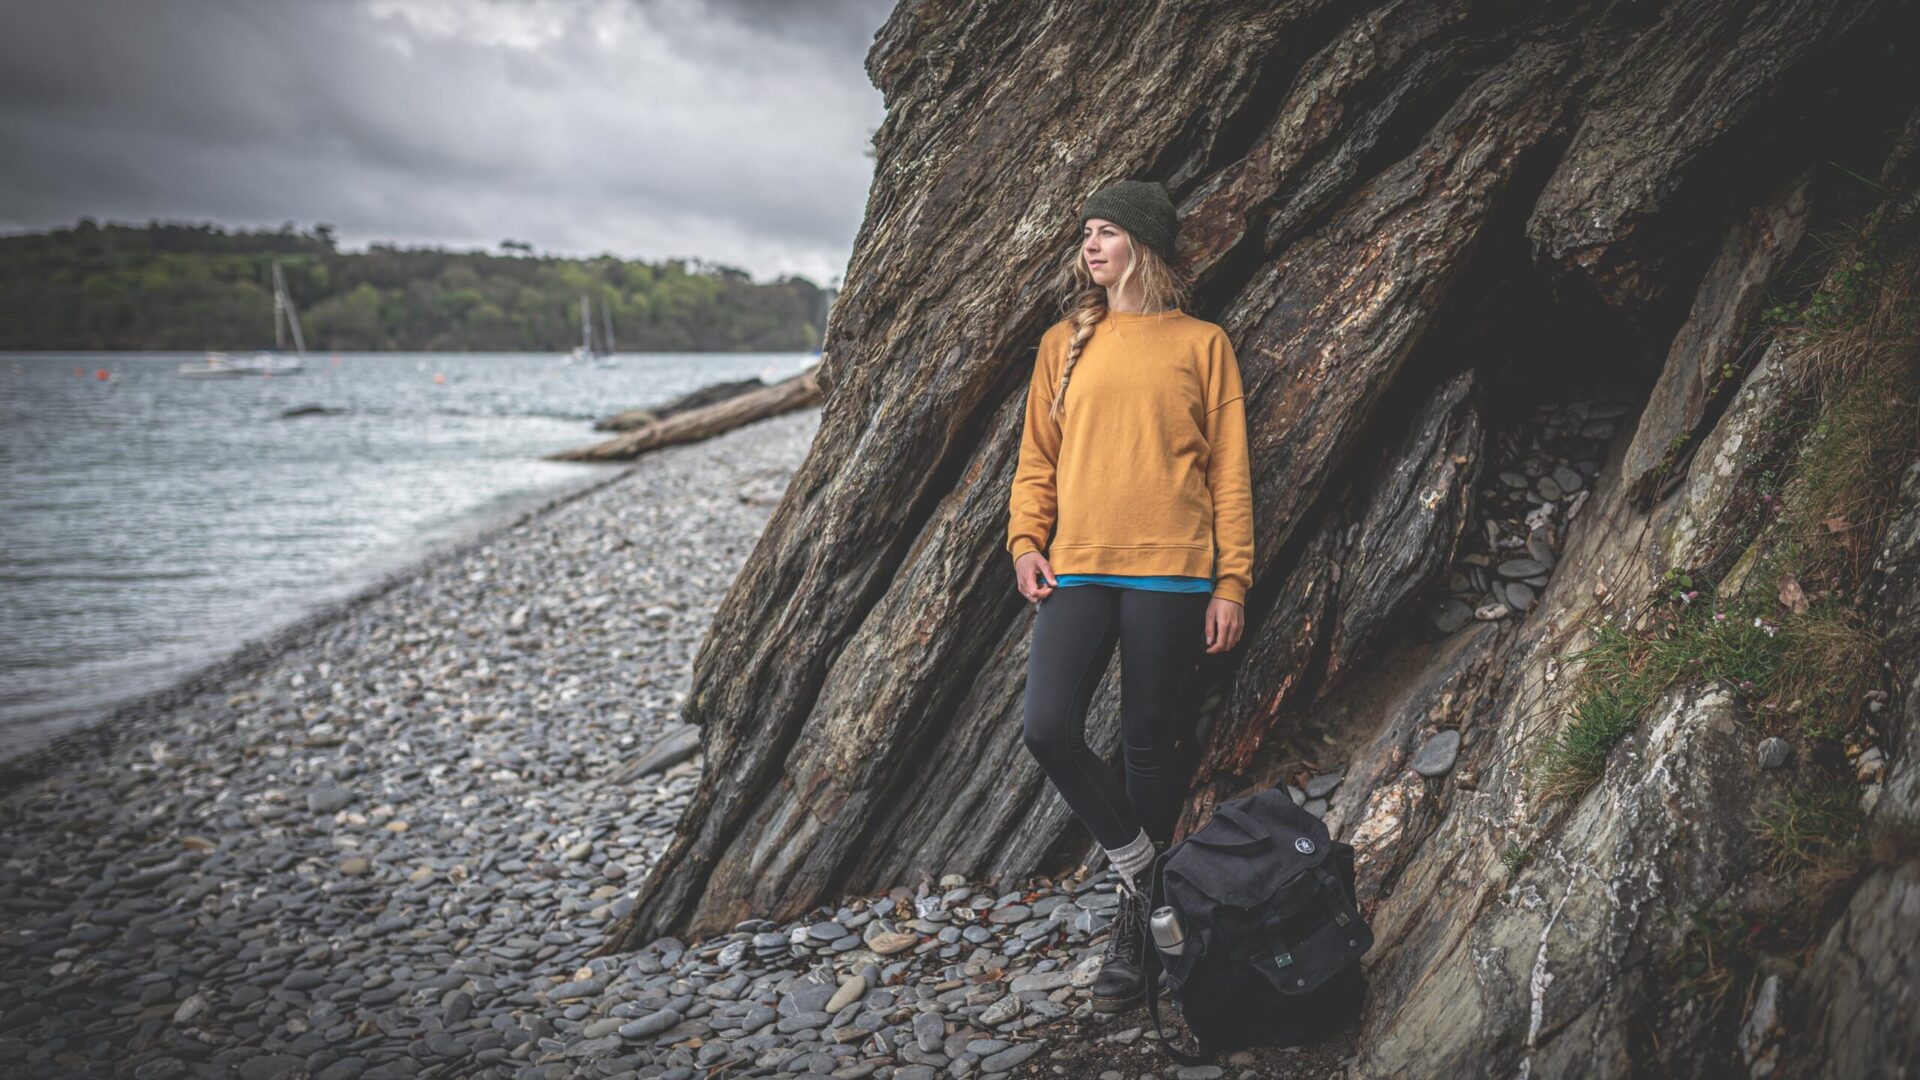 Young woman in hiking gear on a beach. Photo by professional business photographer Claire Wilson.